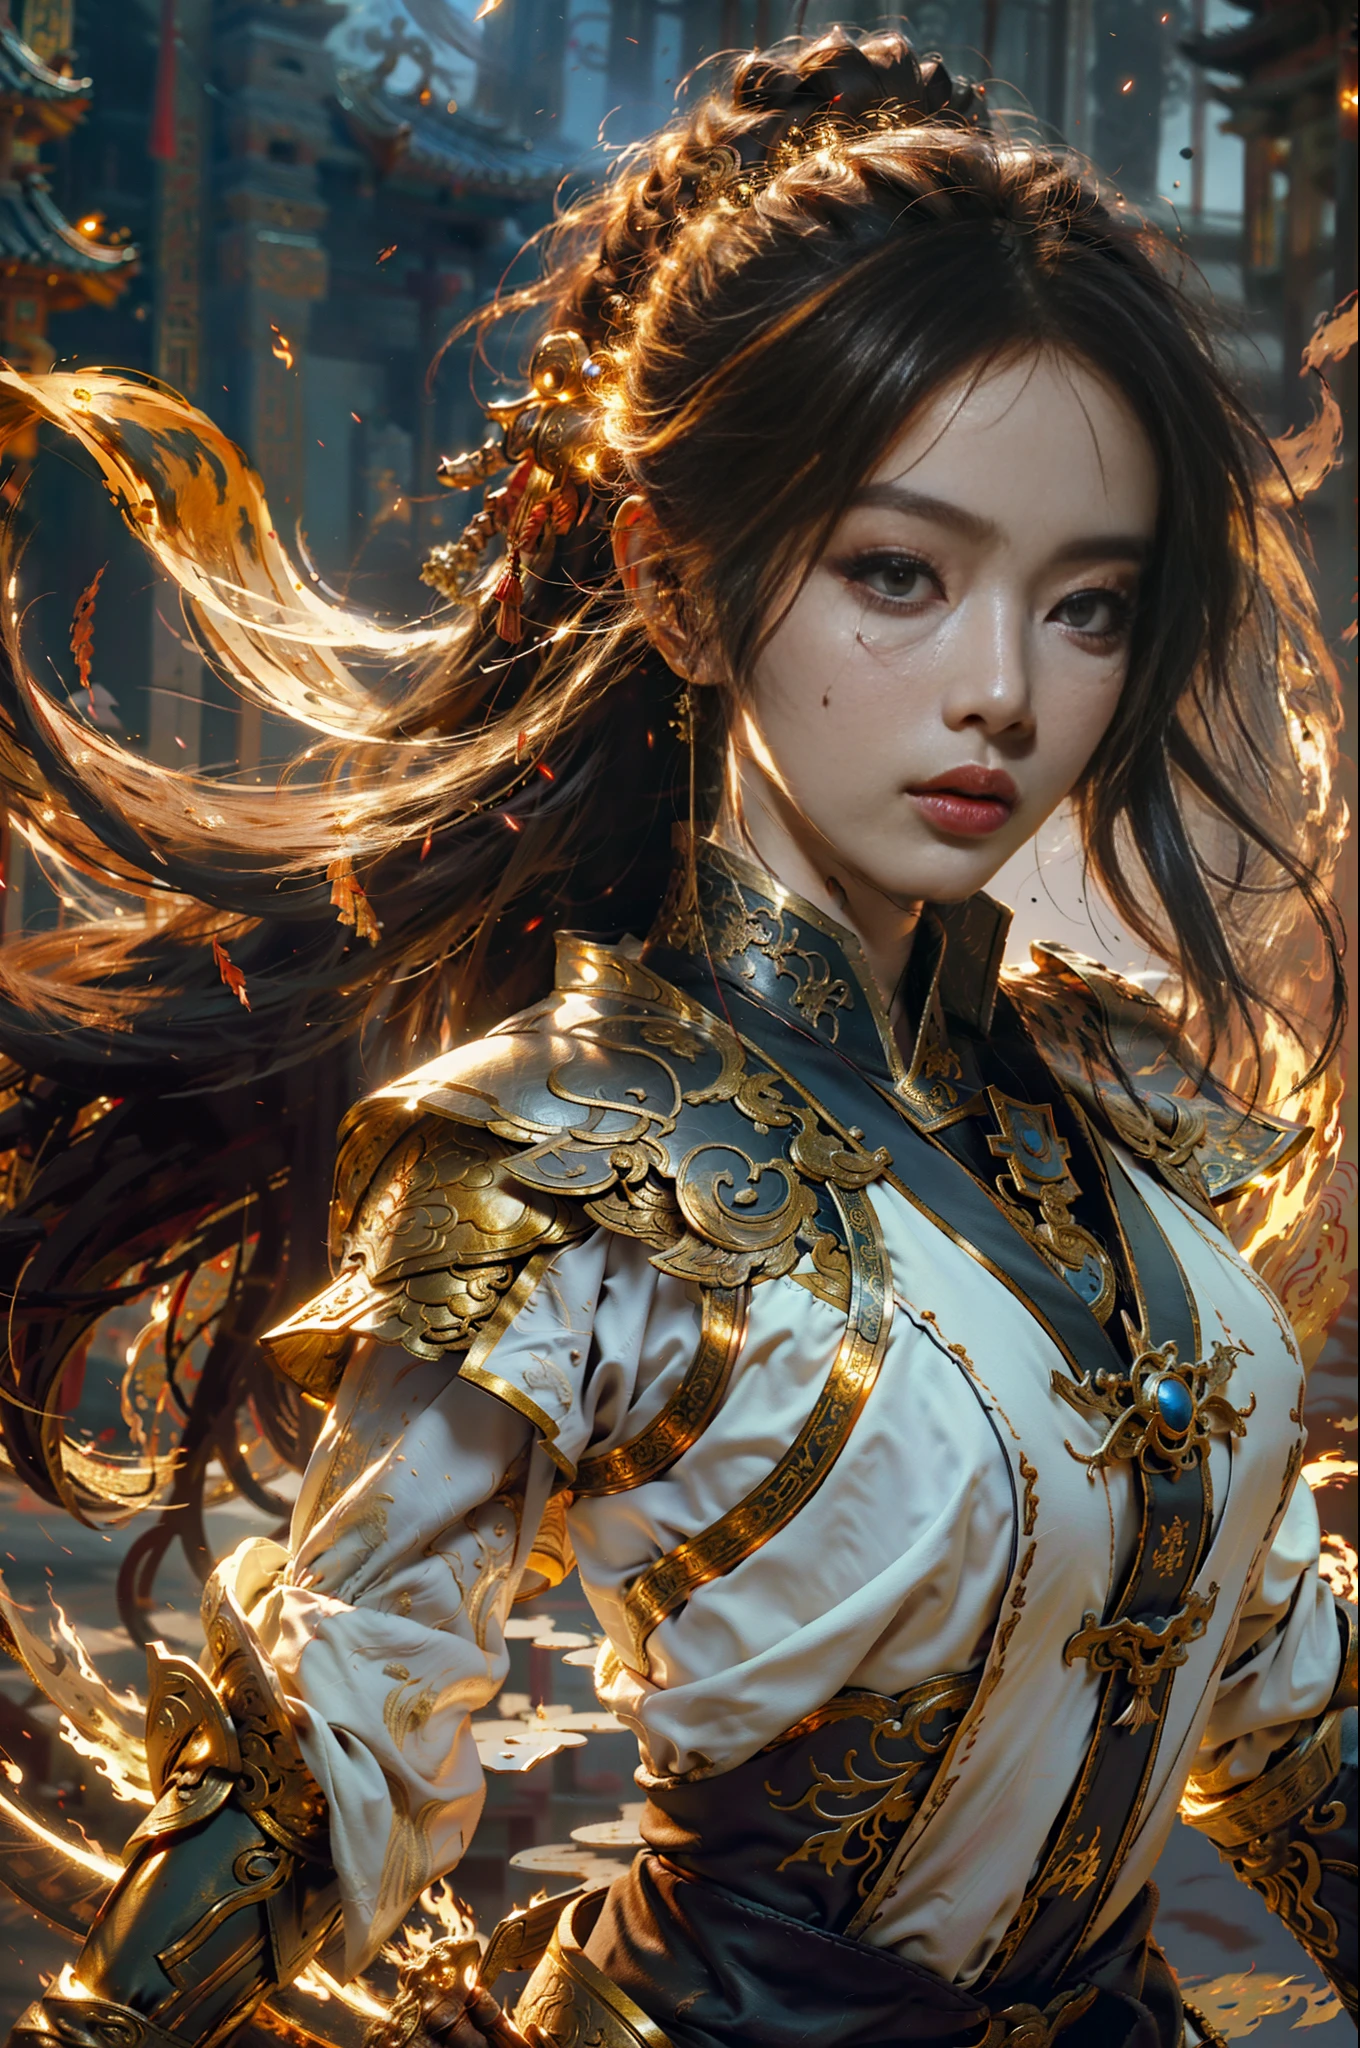 Best Quality, Masterpiece, Ultra High Resolution, (Realism: 1.4), Original Photo, 1Girl, Complex Textures, Gorgeous Armor, Chinese Weapon, Floating Sword, Fire, Light, Serious Expression, Complex Background, Chinese Palace